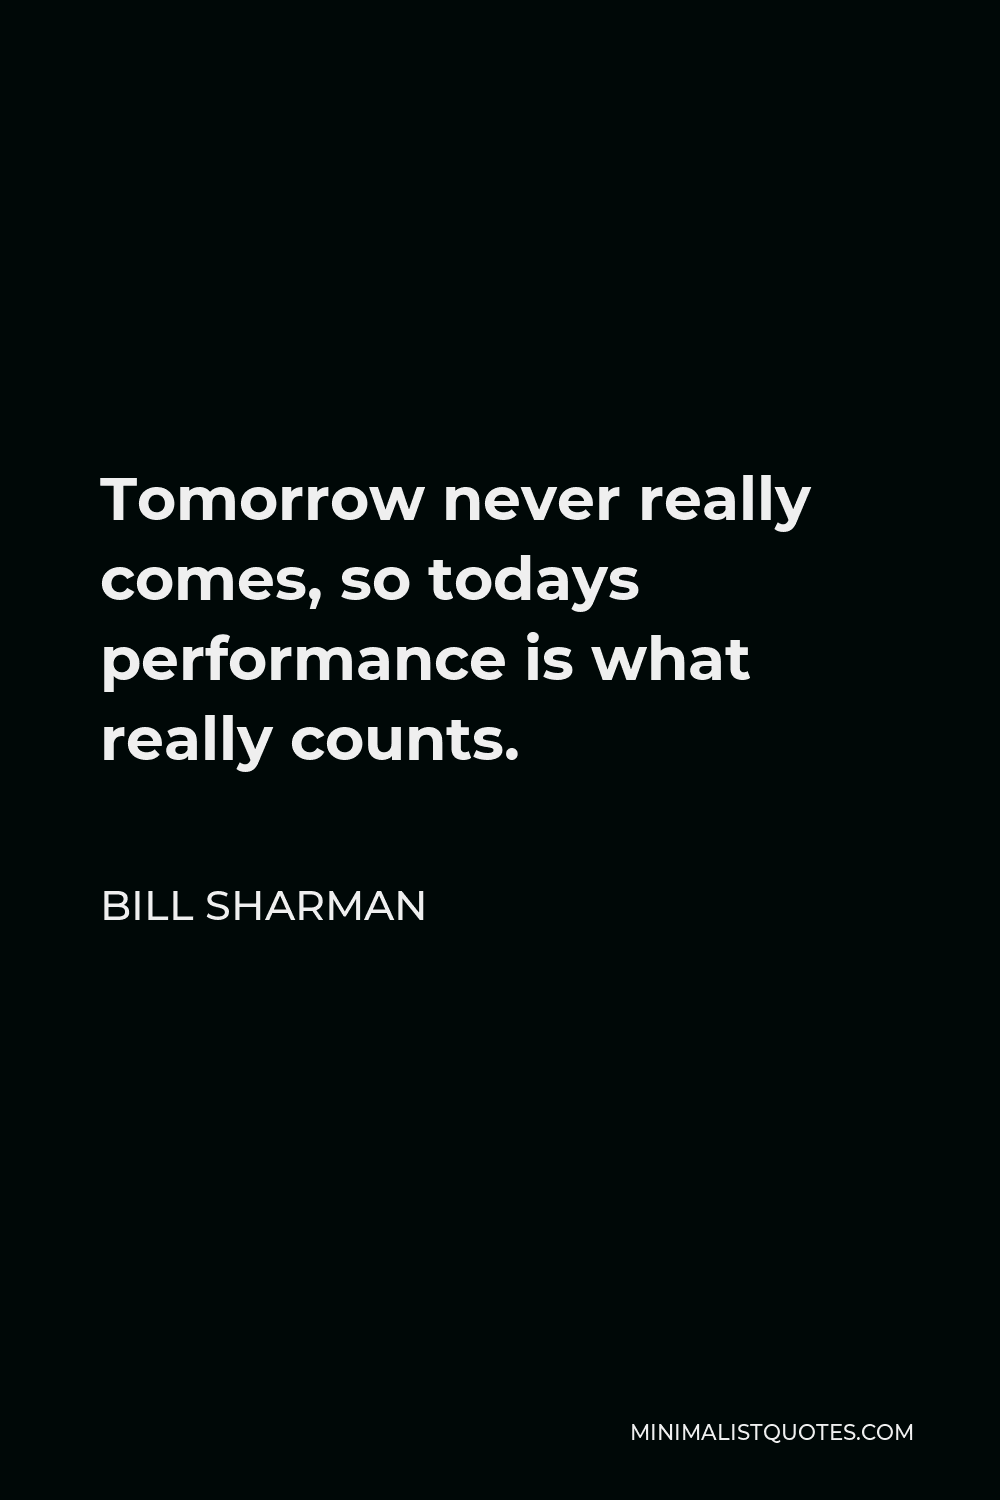 Bill Sharman Quote - Tomorrow never really comes, so todays performance is what really counts.